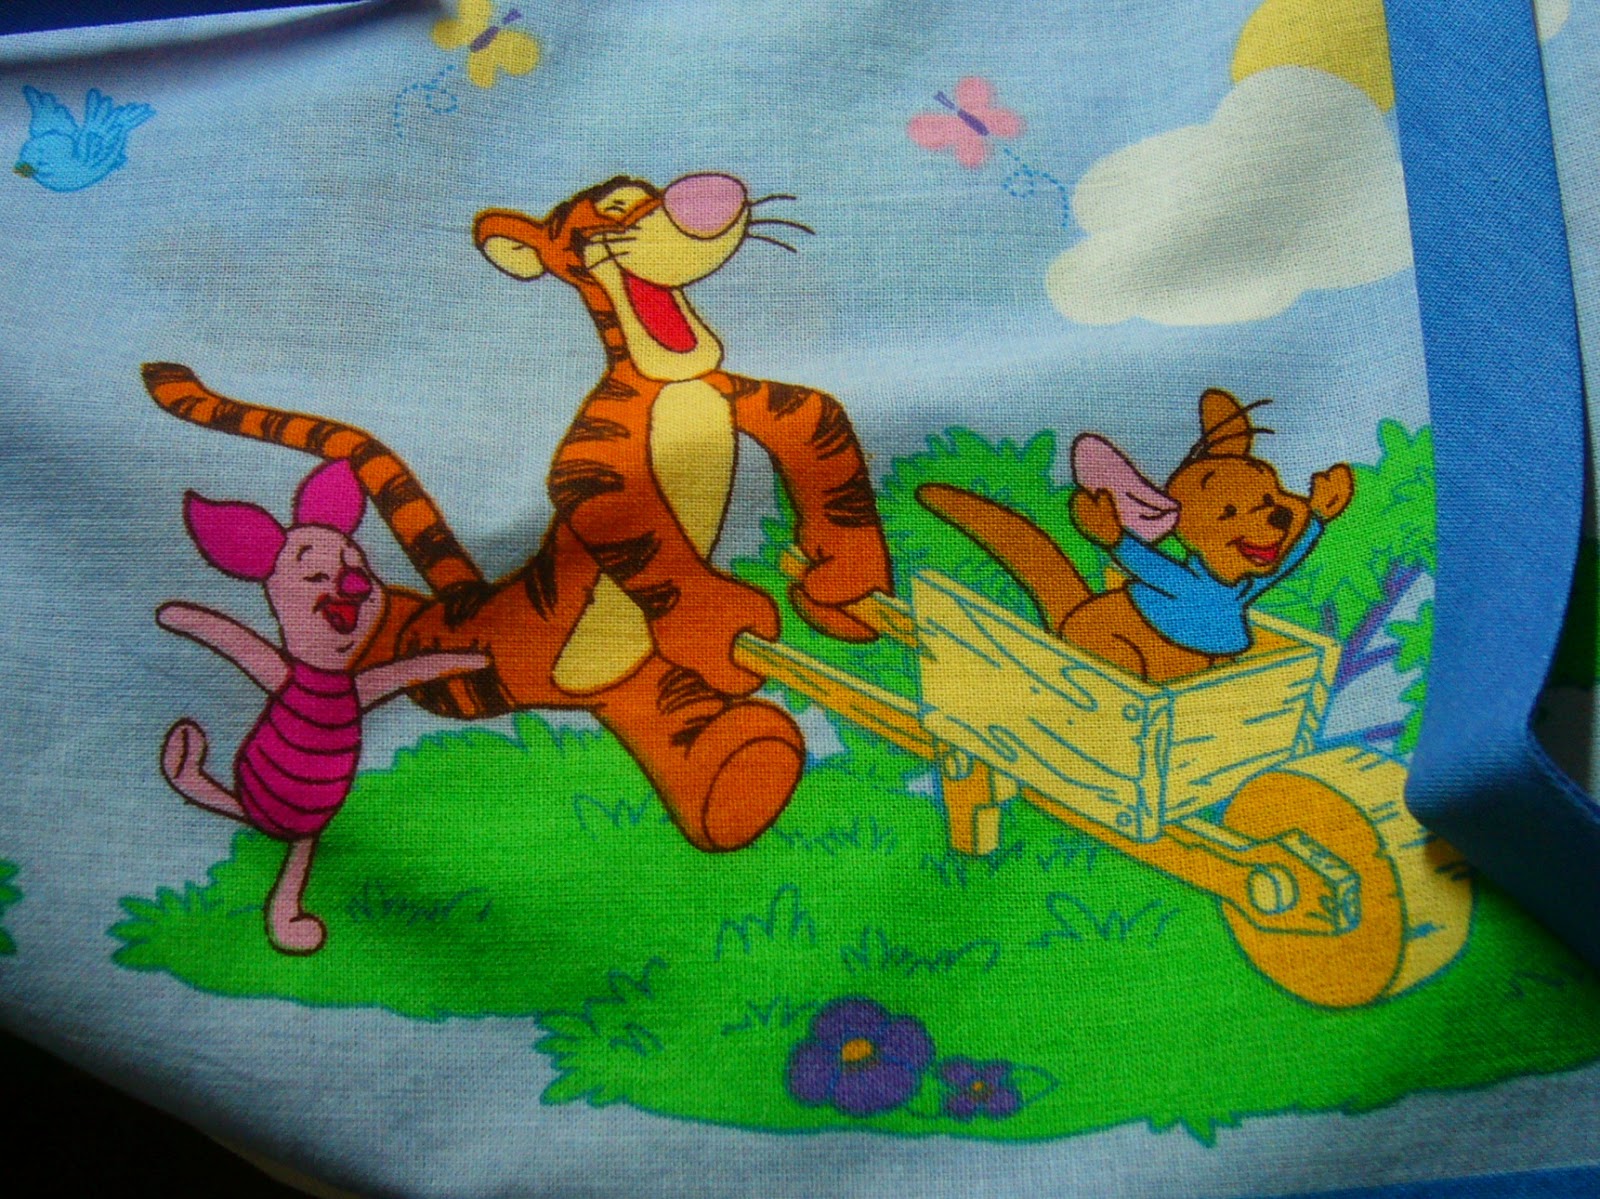 Tigger taking Roo for a ride with Piglet close behind.